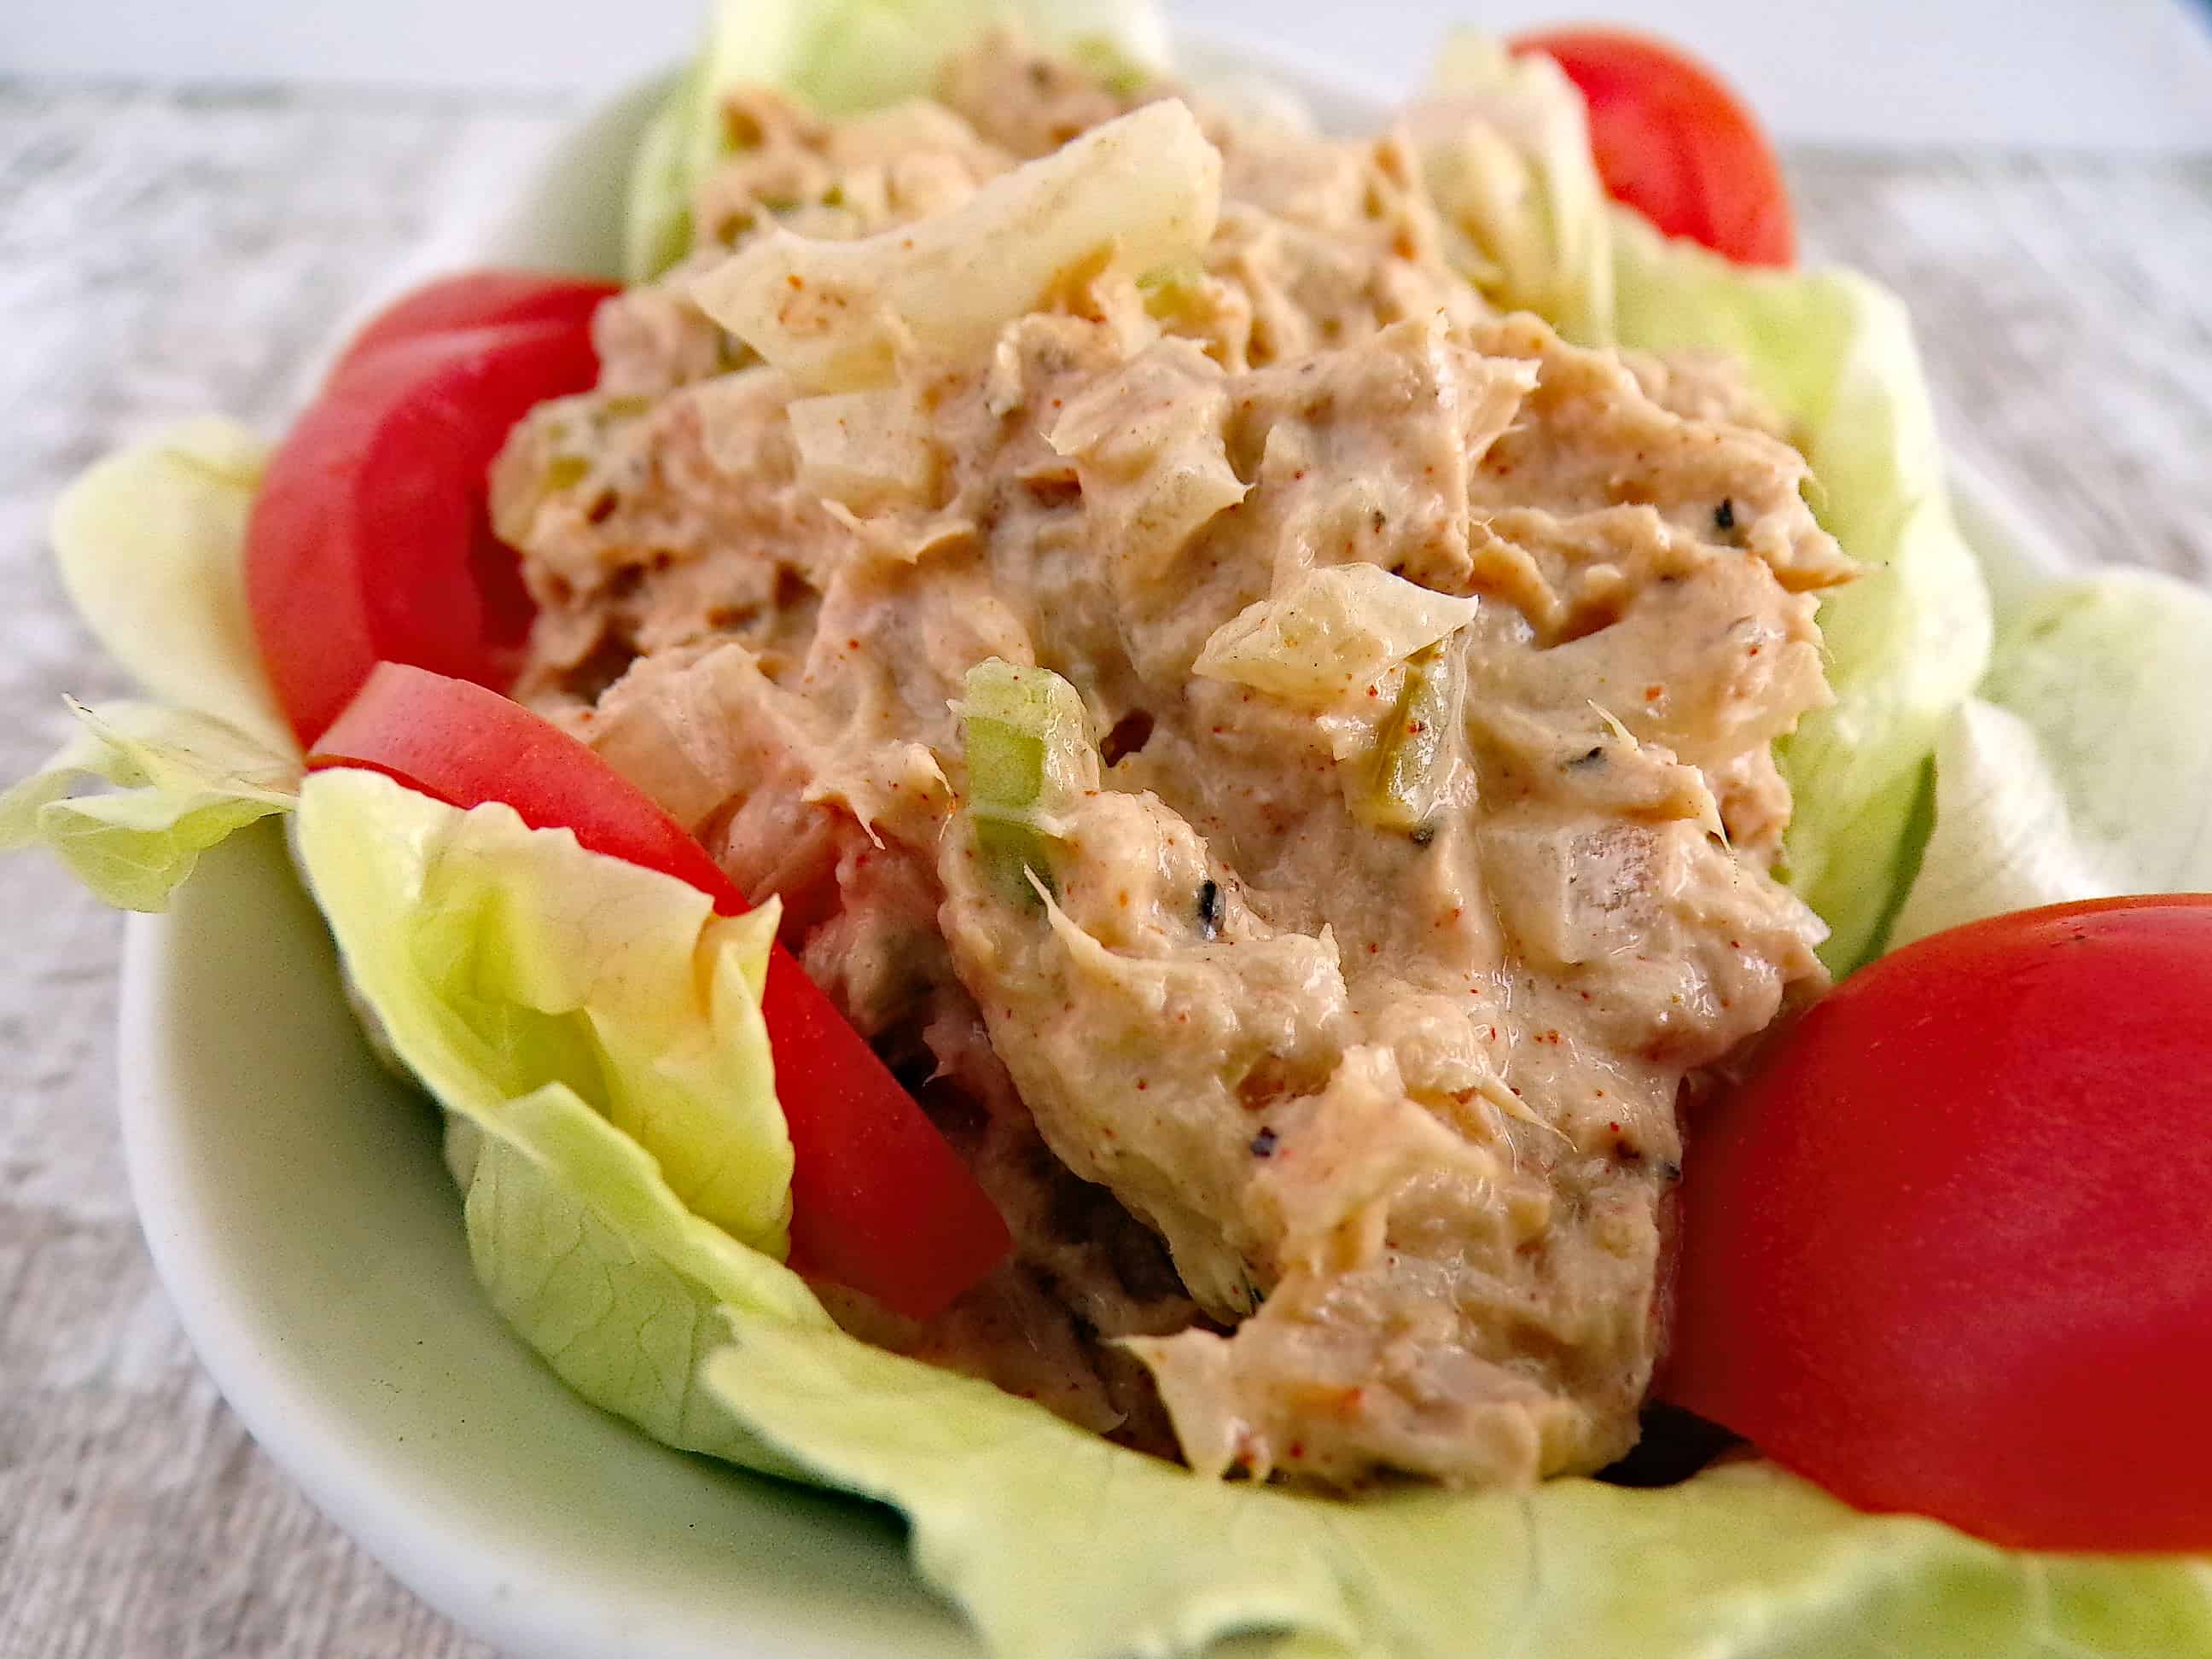 Tuna salad with lettuce and tomatoes